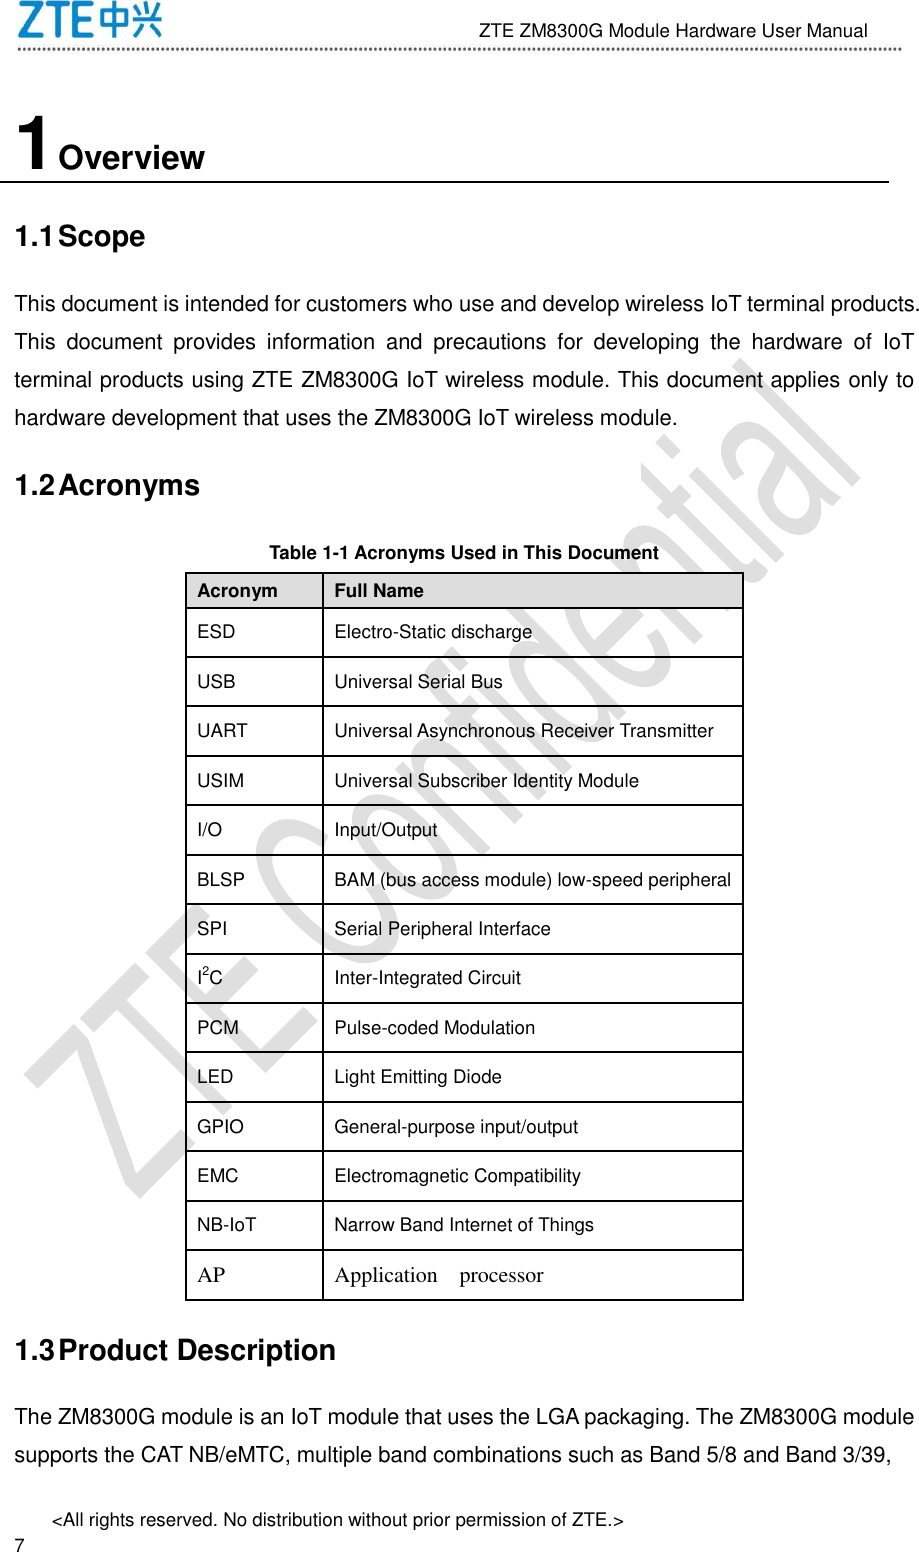                              ZTE ZM8300G Module Hardware User Manual &lt;All rights reserved. No distribution without prior permission of ZTE.&gt;                                                               7 1 Overview 1.1 Scope This document is intended for customers who use and develop wireless IoT terminal products. This  document  provides  information  and  precautions  for  developing  the  hardware  of  IoT terminal products using ZTE ZM8300G IoT wireless module. This document applies only to hardware development that uses the ZM8300G IoT wireless module. 1.2 Acronyms Table 1-1 Acronyms Used in This Document Acronym Full Name ESD Electro-Static discharge USB Universal Serial Bus UART Universal Asynchronous Receiver Transmitter USIM Universal Subscriber Identity Module I/O Input/Output BLSP BAM (bus access module) low-speed peripheral SPI Serial Peripheral Interface I2C Inter-Integrated Circuit PCM Pulse-coded Modulation LED Light Emitting Diode GPIO General-purpose input/output EMC Electromagnetic Compatibility NB-IoT Narrow Band Internet of Things AP Application    processor   1.3 Product Description The ZM8300G module is an IoT module that uses the LGA packaging. The ZM8300G module supports the CAT NB/eMTC, multiple band combinations such as Band 5/8 and Band 3/39, 